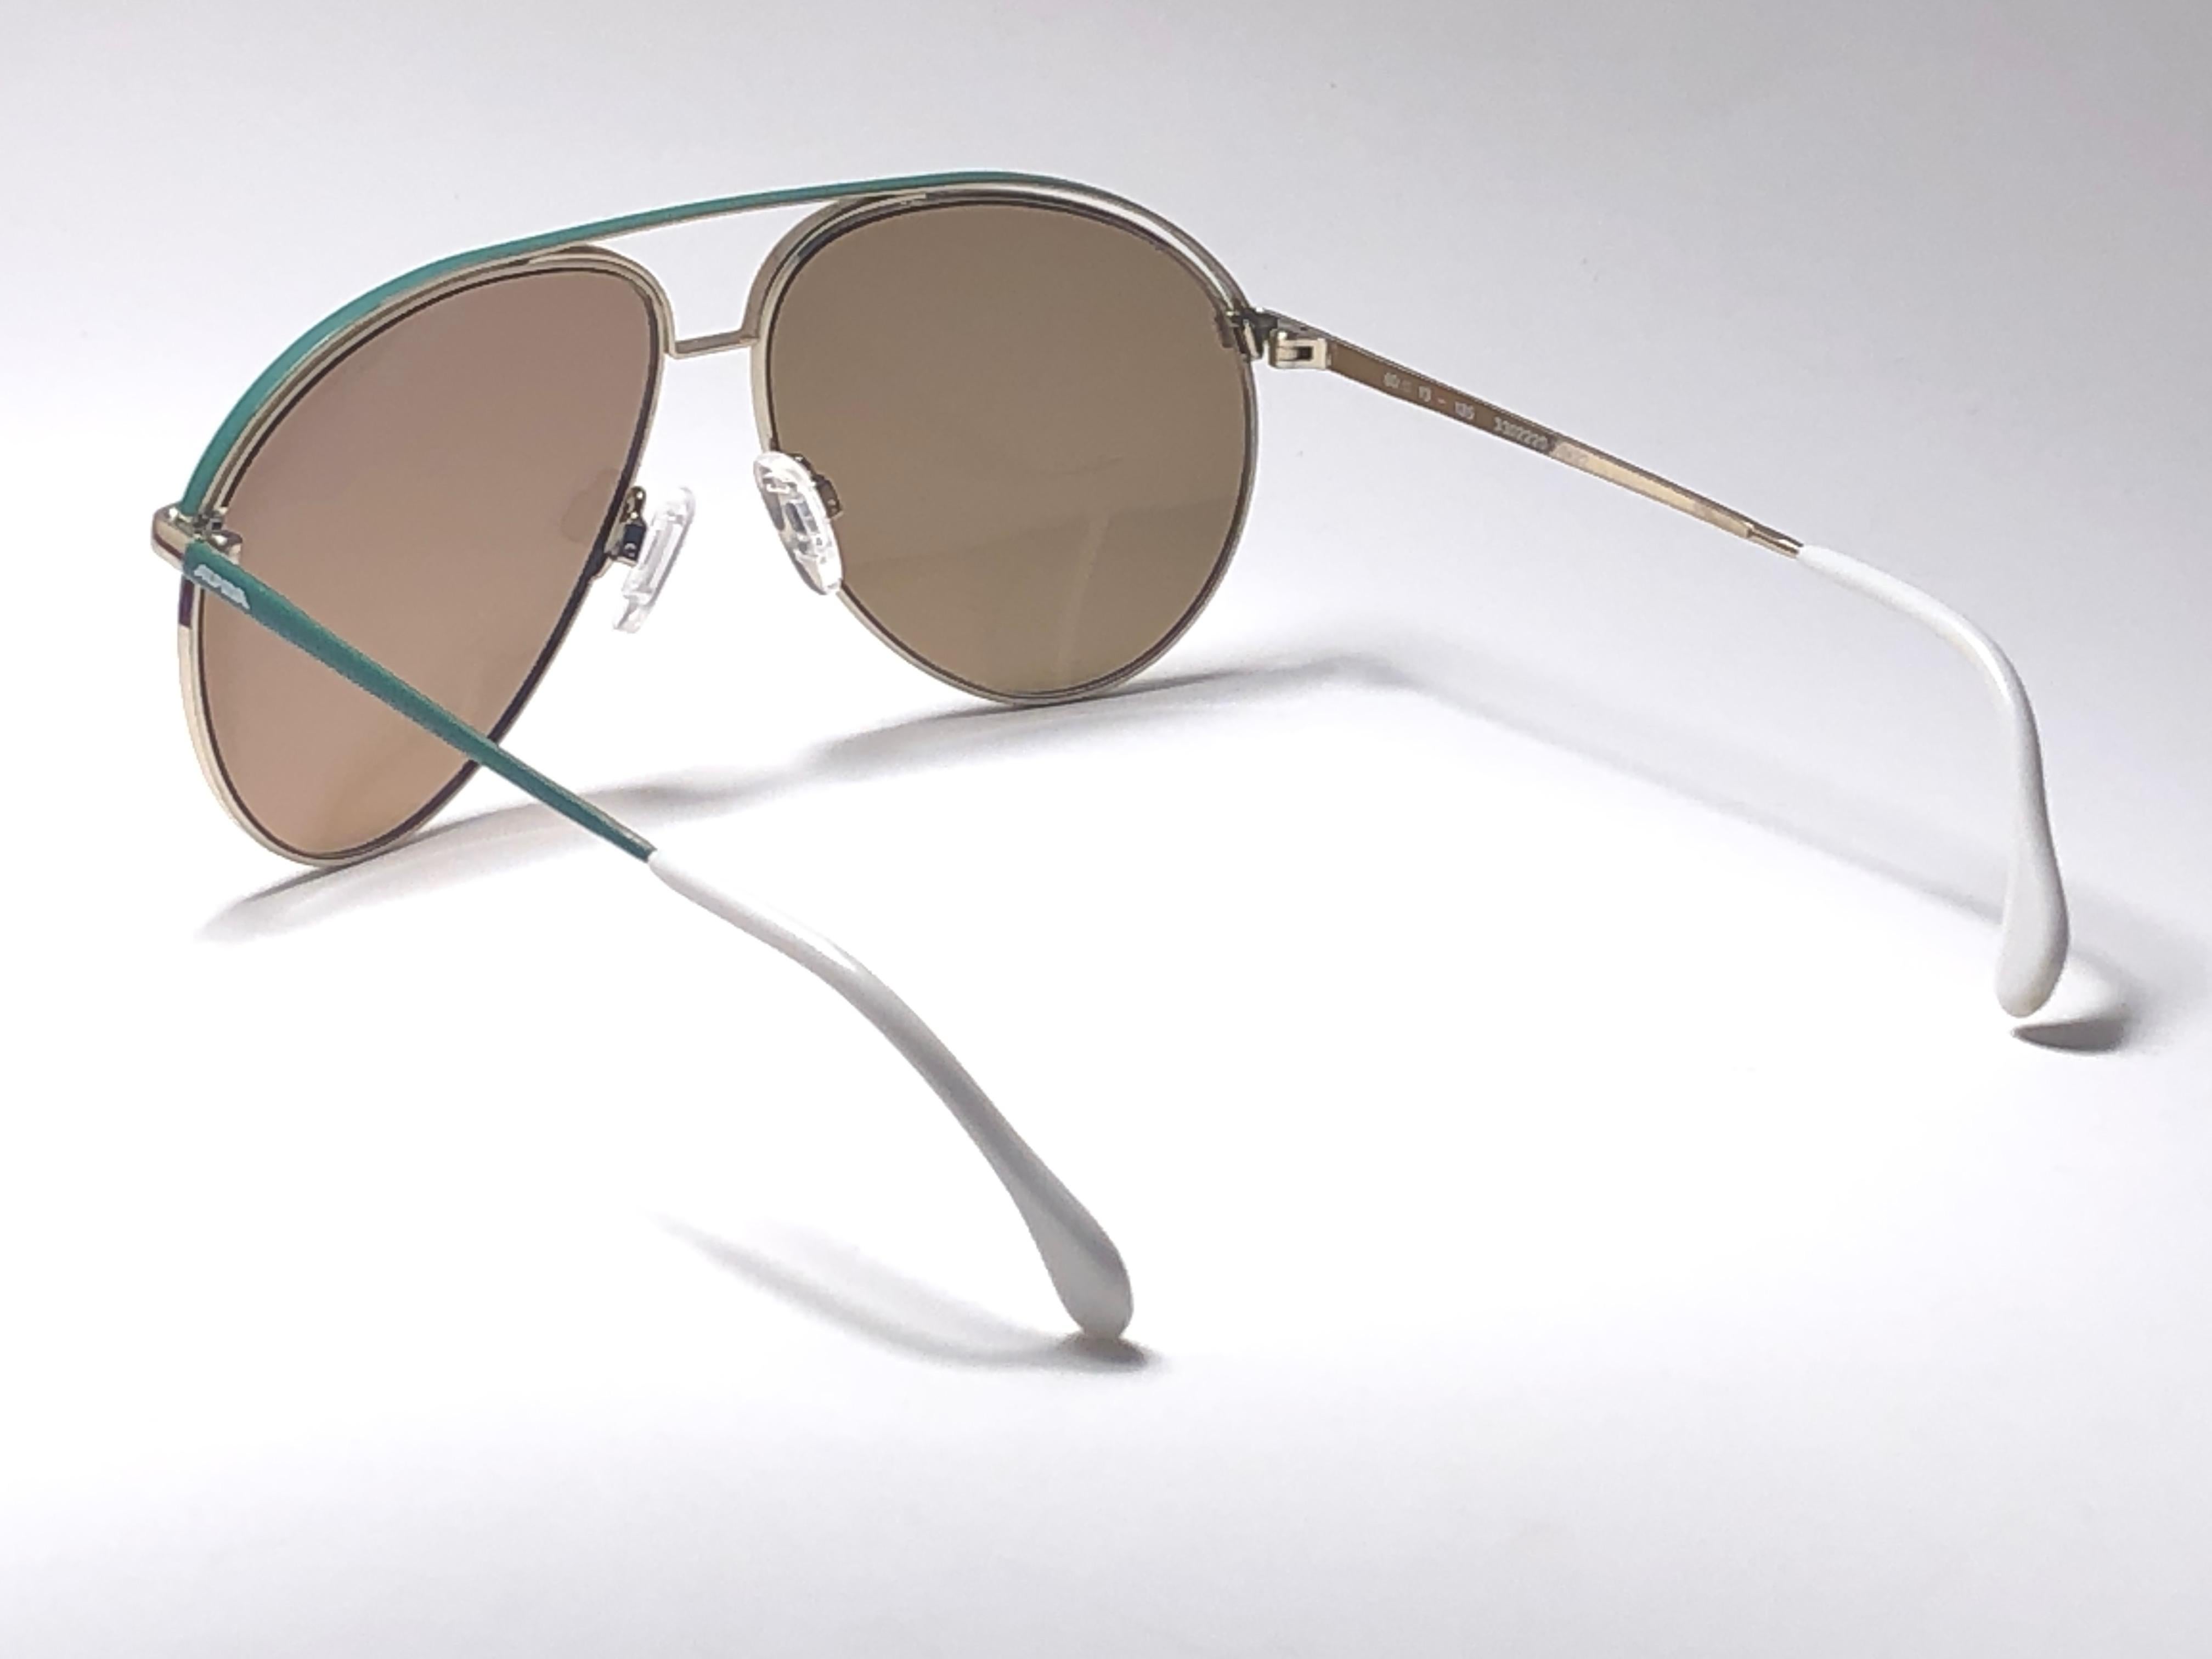 New Vintage Alpina Aviator Sunglasses. Green frame with gold mirror lenses.
This pair has a minor sign of wear due to storage.

Made in West Germany.